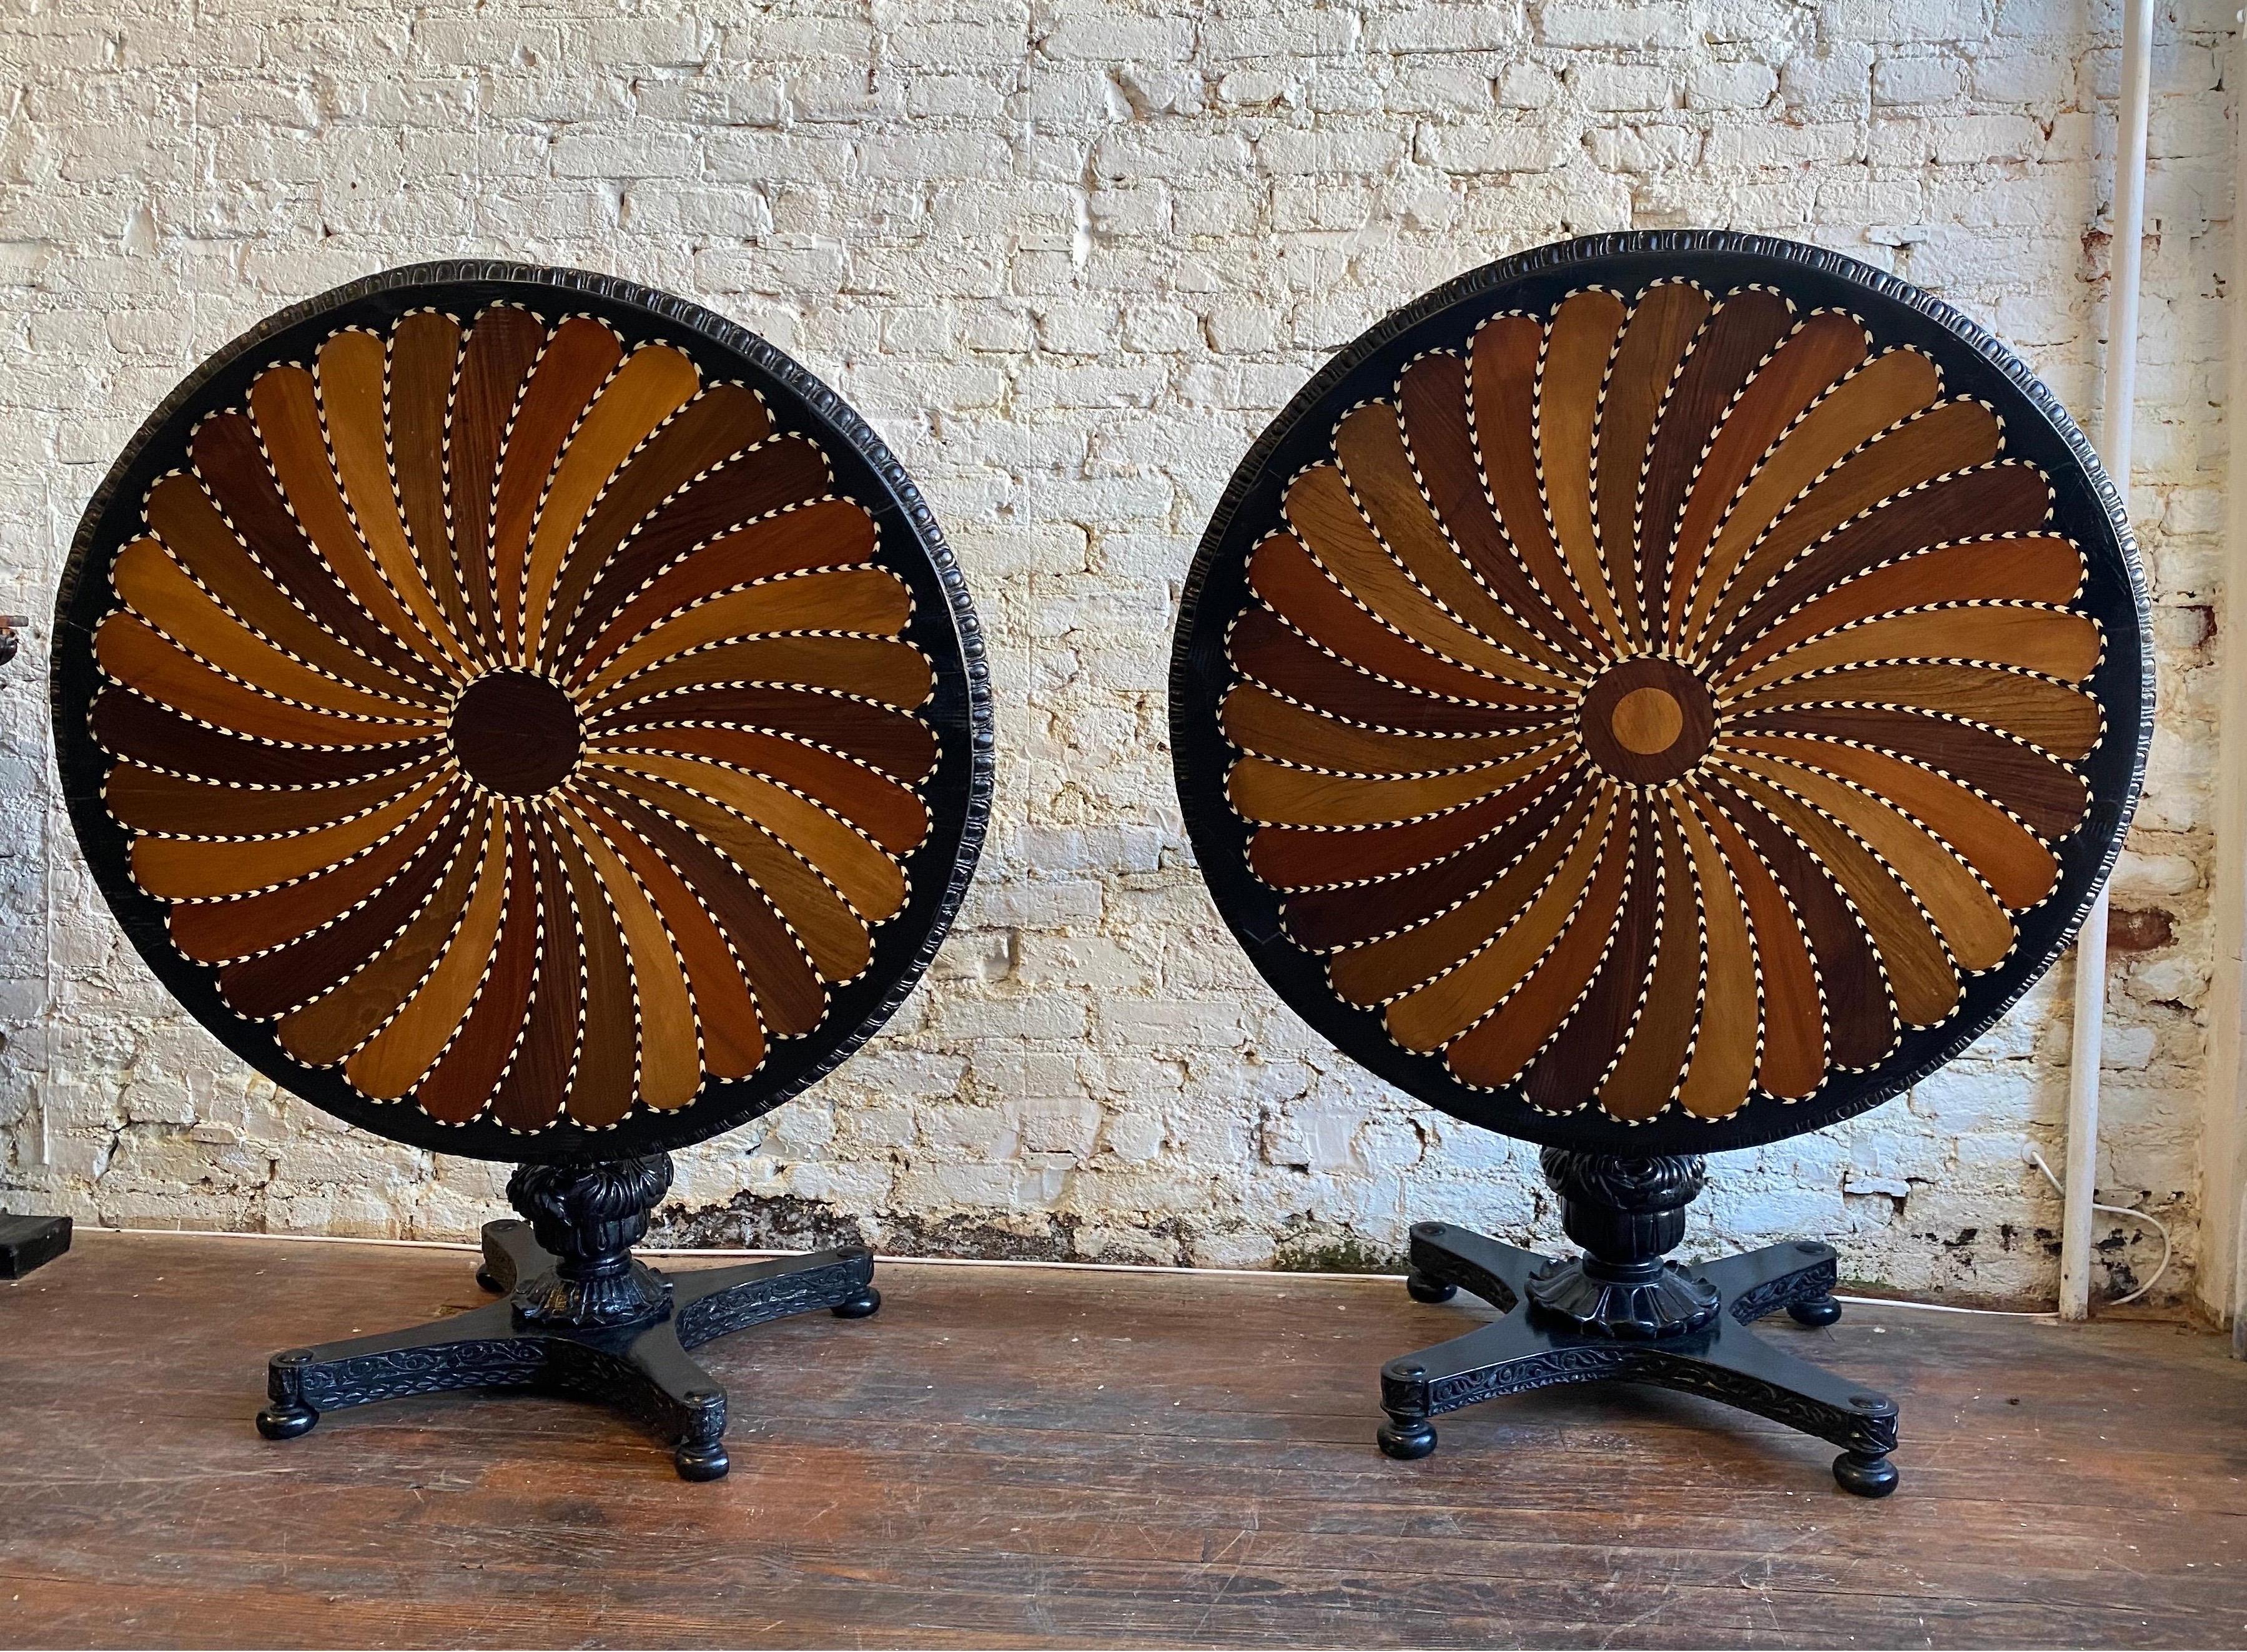 Fantastic near pair of 19th century British colonial Ceylonese specimen top tables. Made in British Ceylon during the 19th century, these tables are gorgeous. Ebonized bases with inlaid tops. 

These two Anglo Indian tables are very similar- the